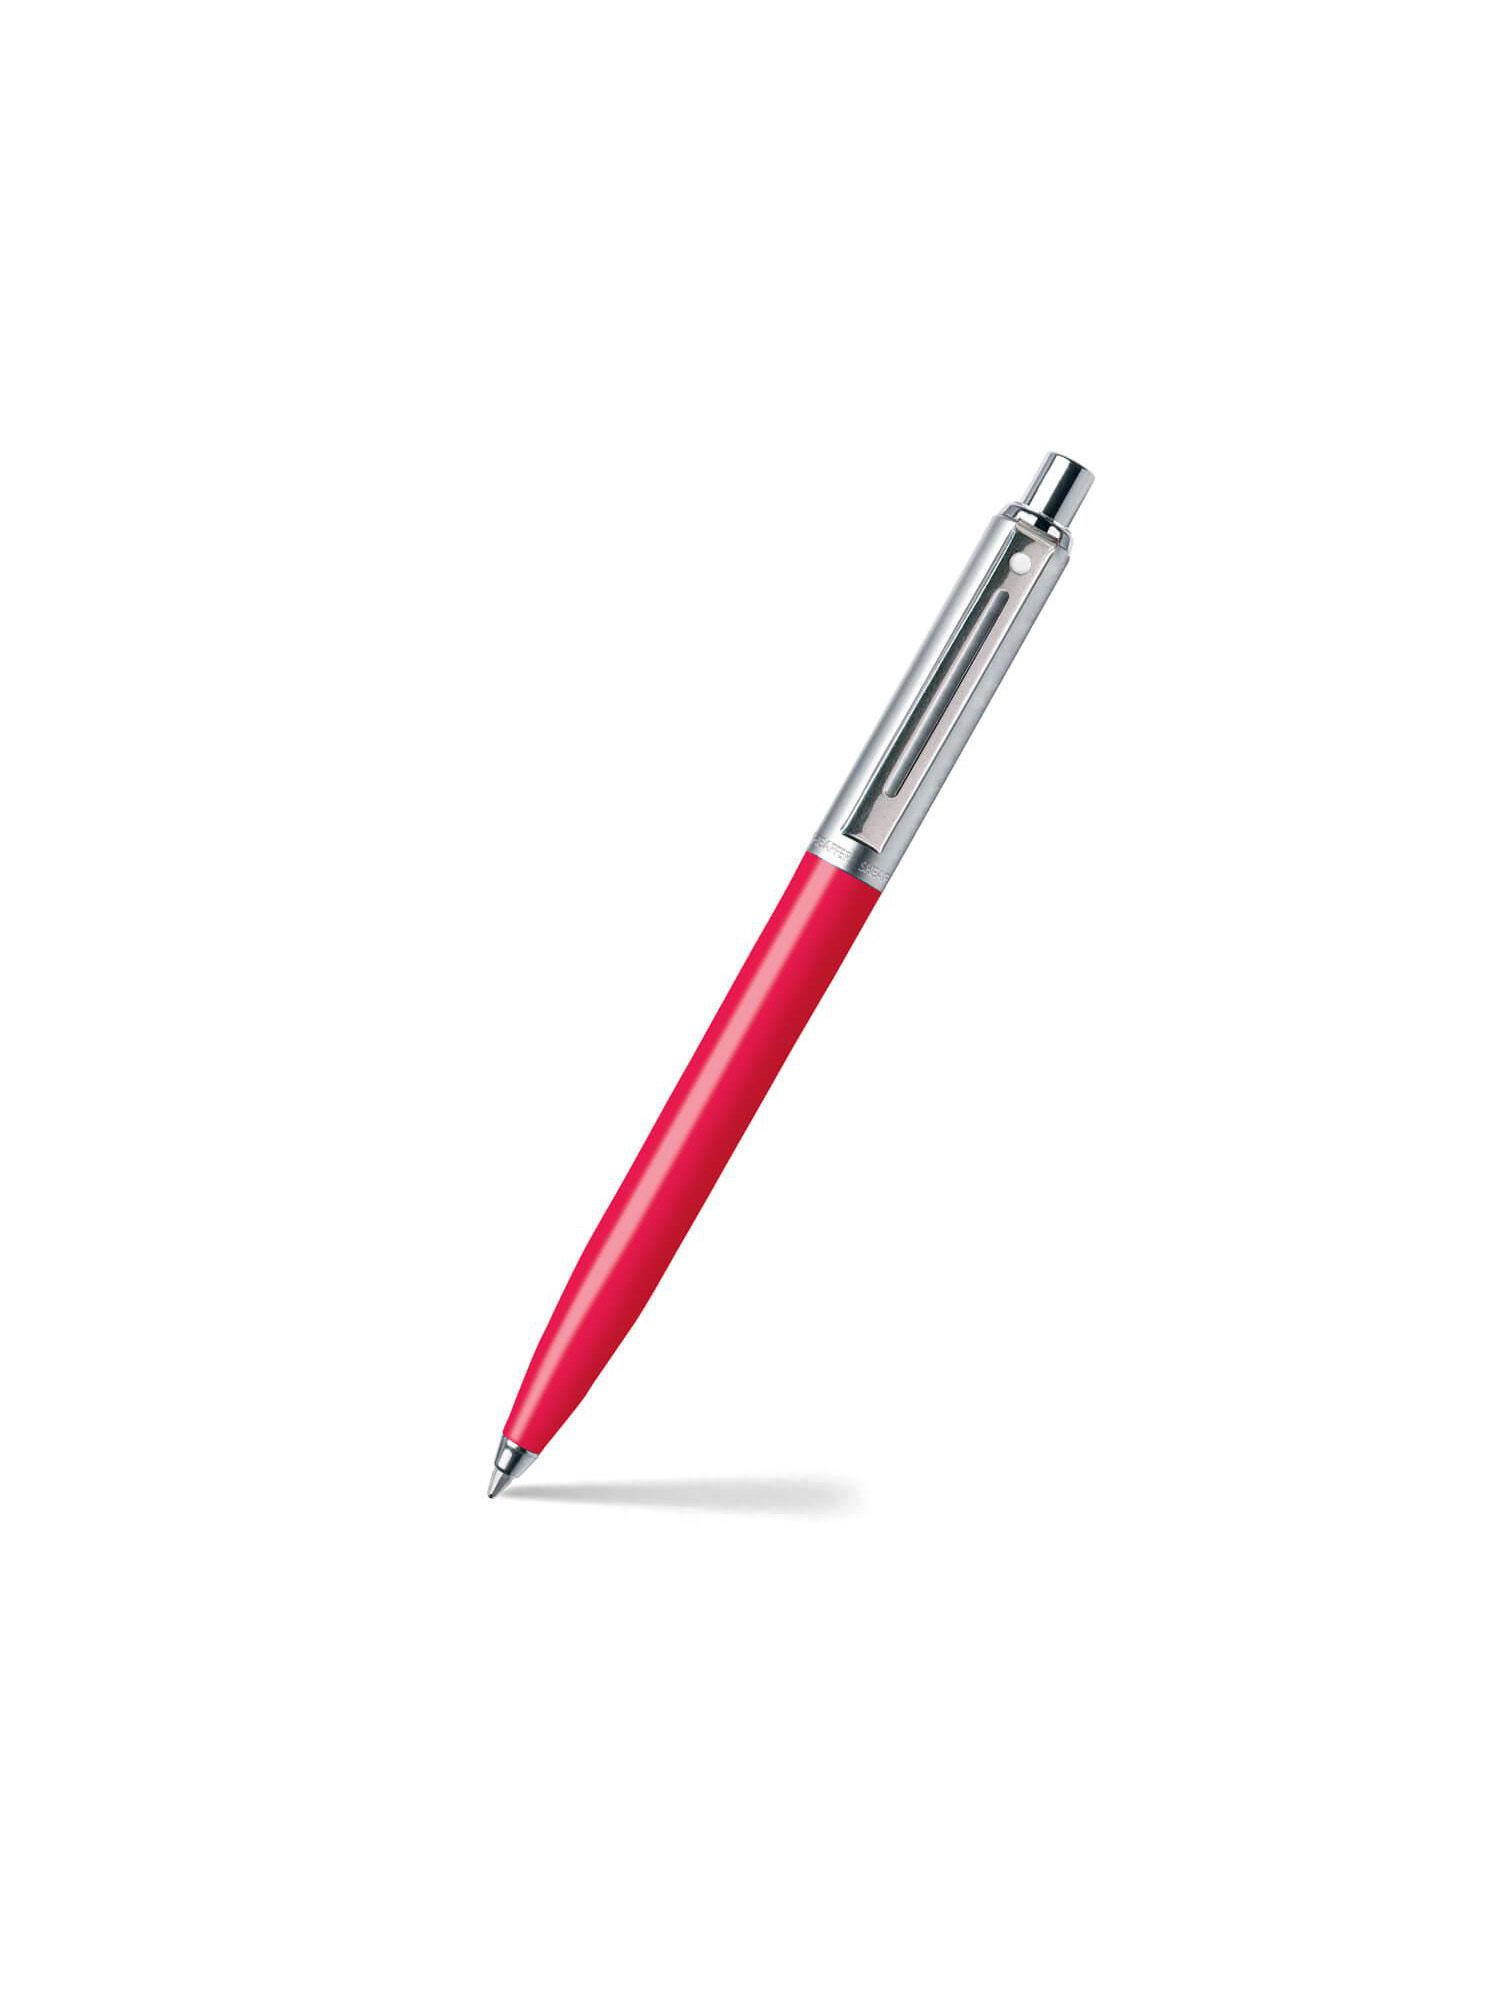 a 321 sentinel ballpoint pen – deep pink and brushed chrome with chrome-plated trim